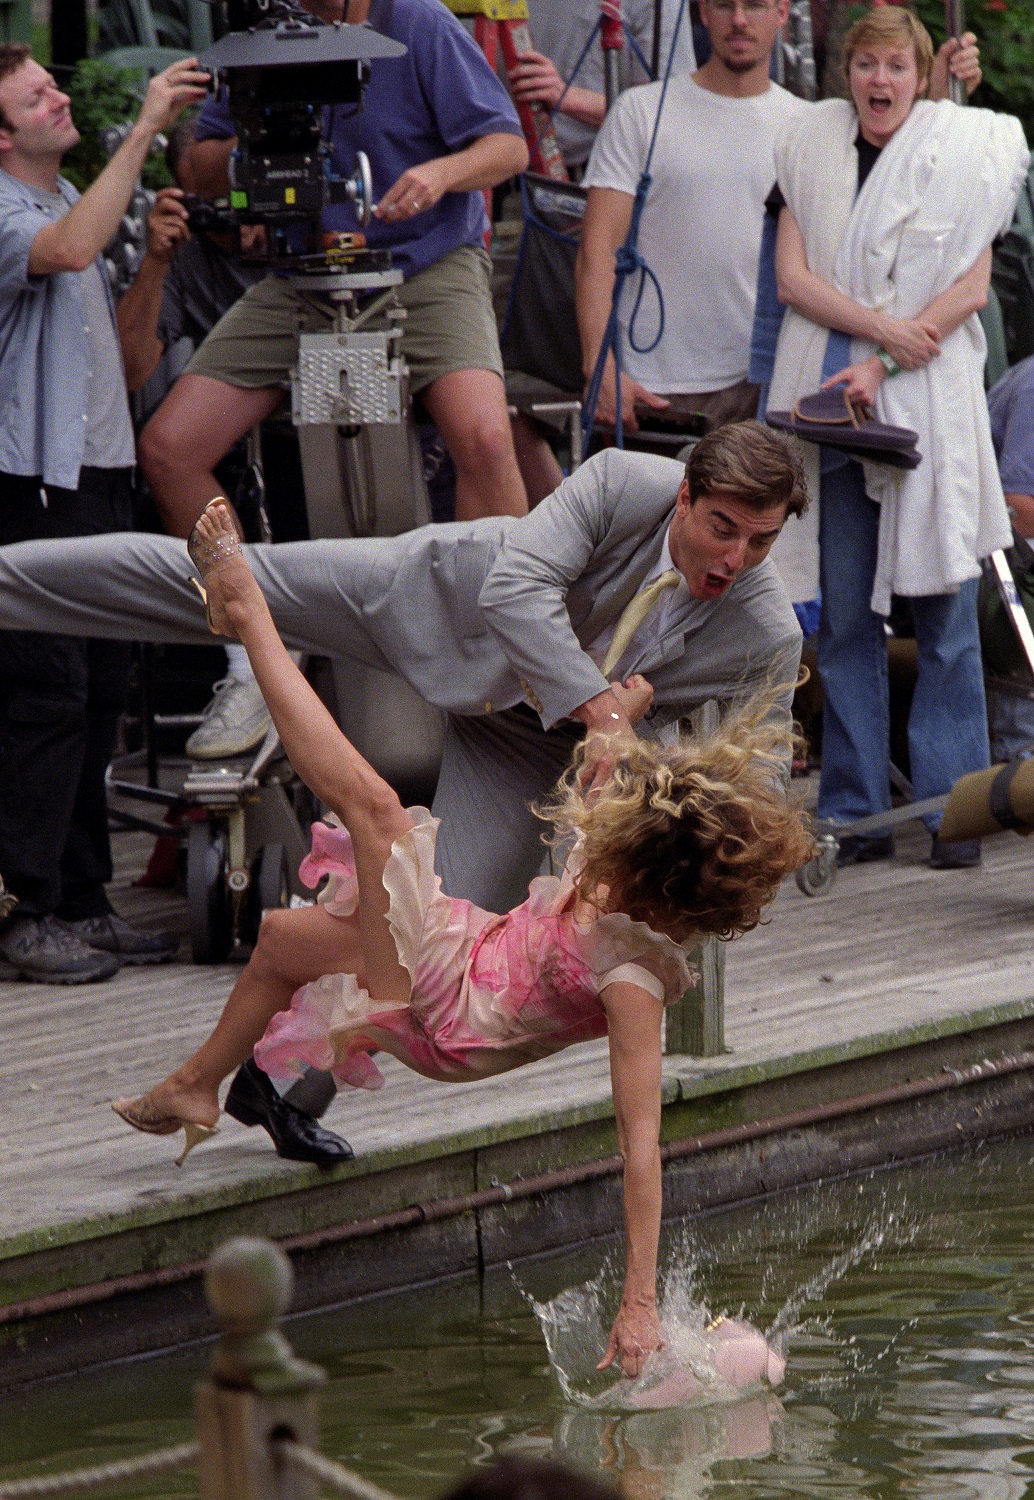 Sarah Jessica Parker and Chris Noth fall into Central Park Lake filming a scene for Sex & the City, NYC July 24, 2000. Exclusive (Photo by Lawrence Schwartzwald/Sygma via Getty Images)